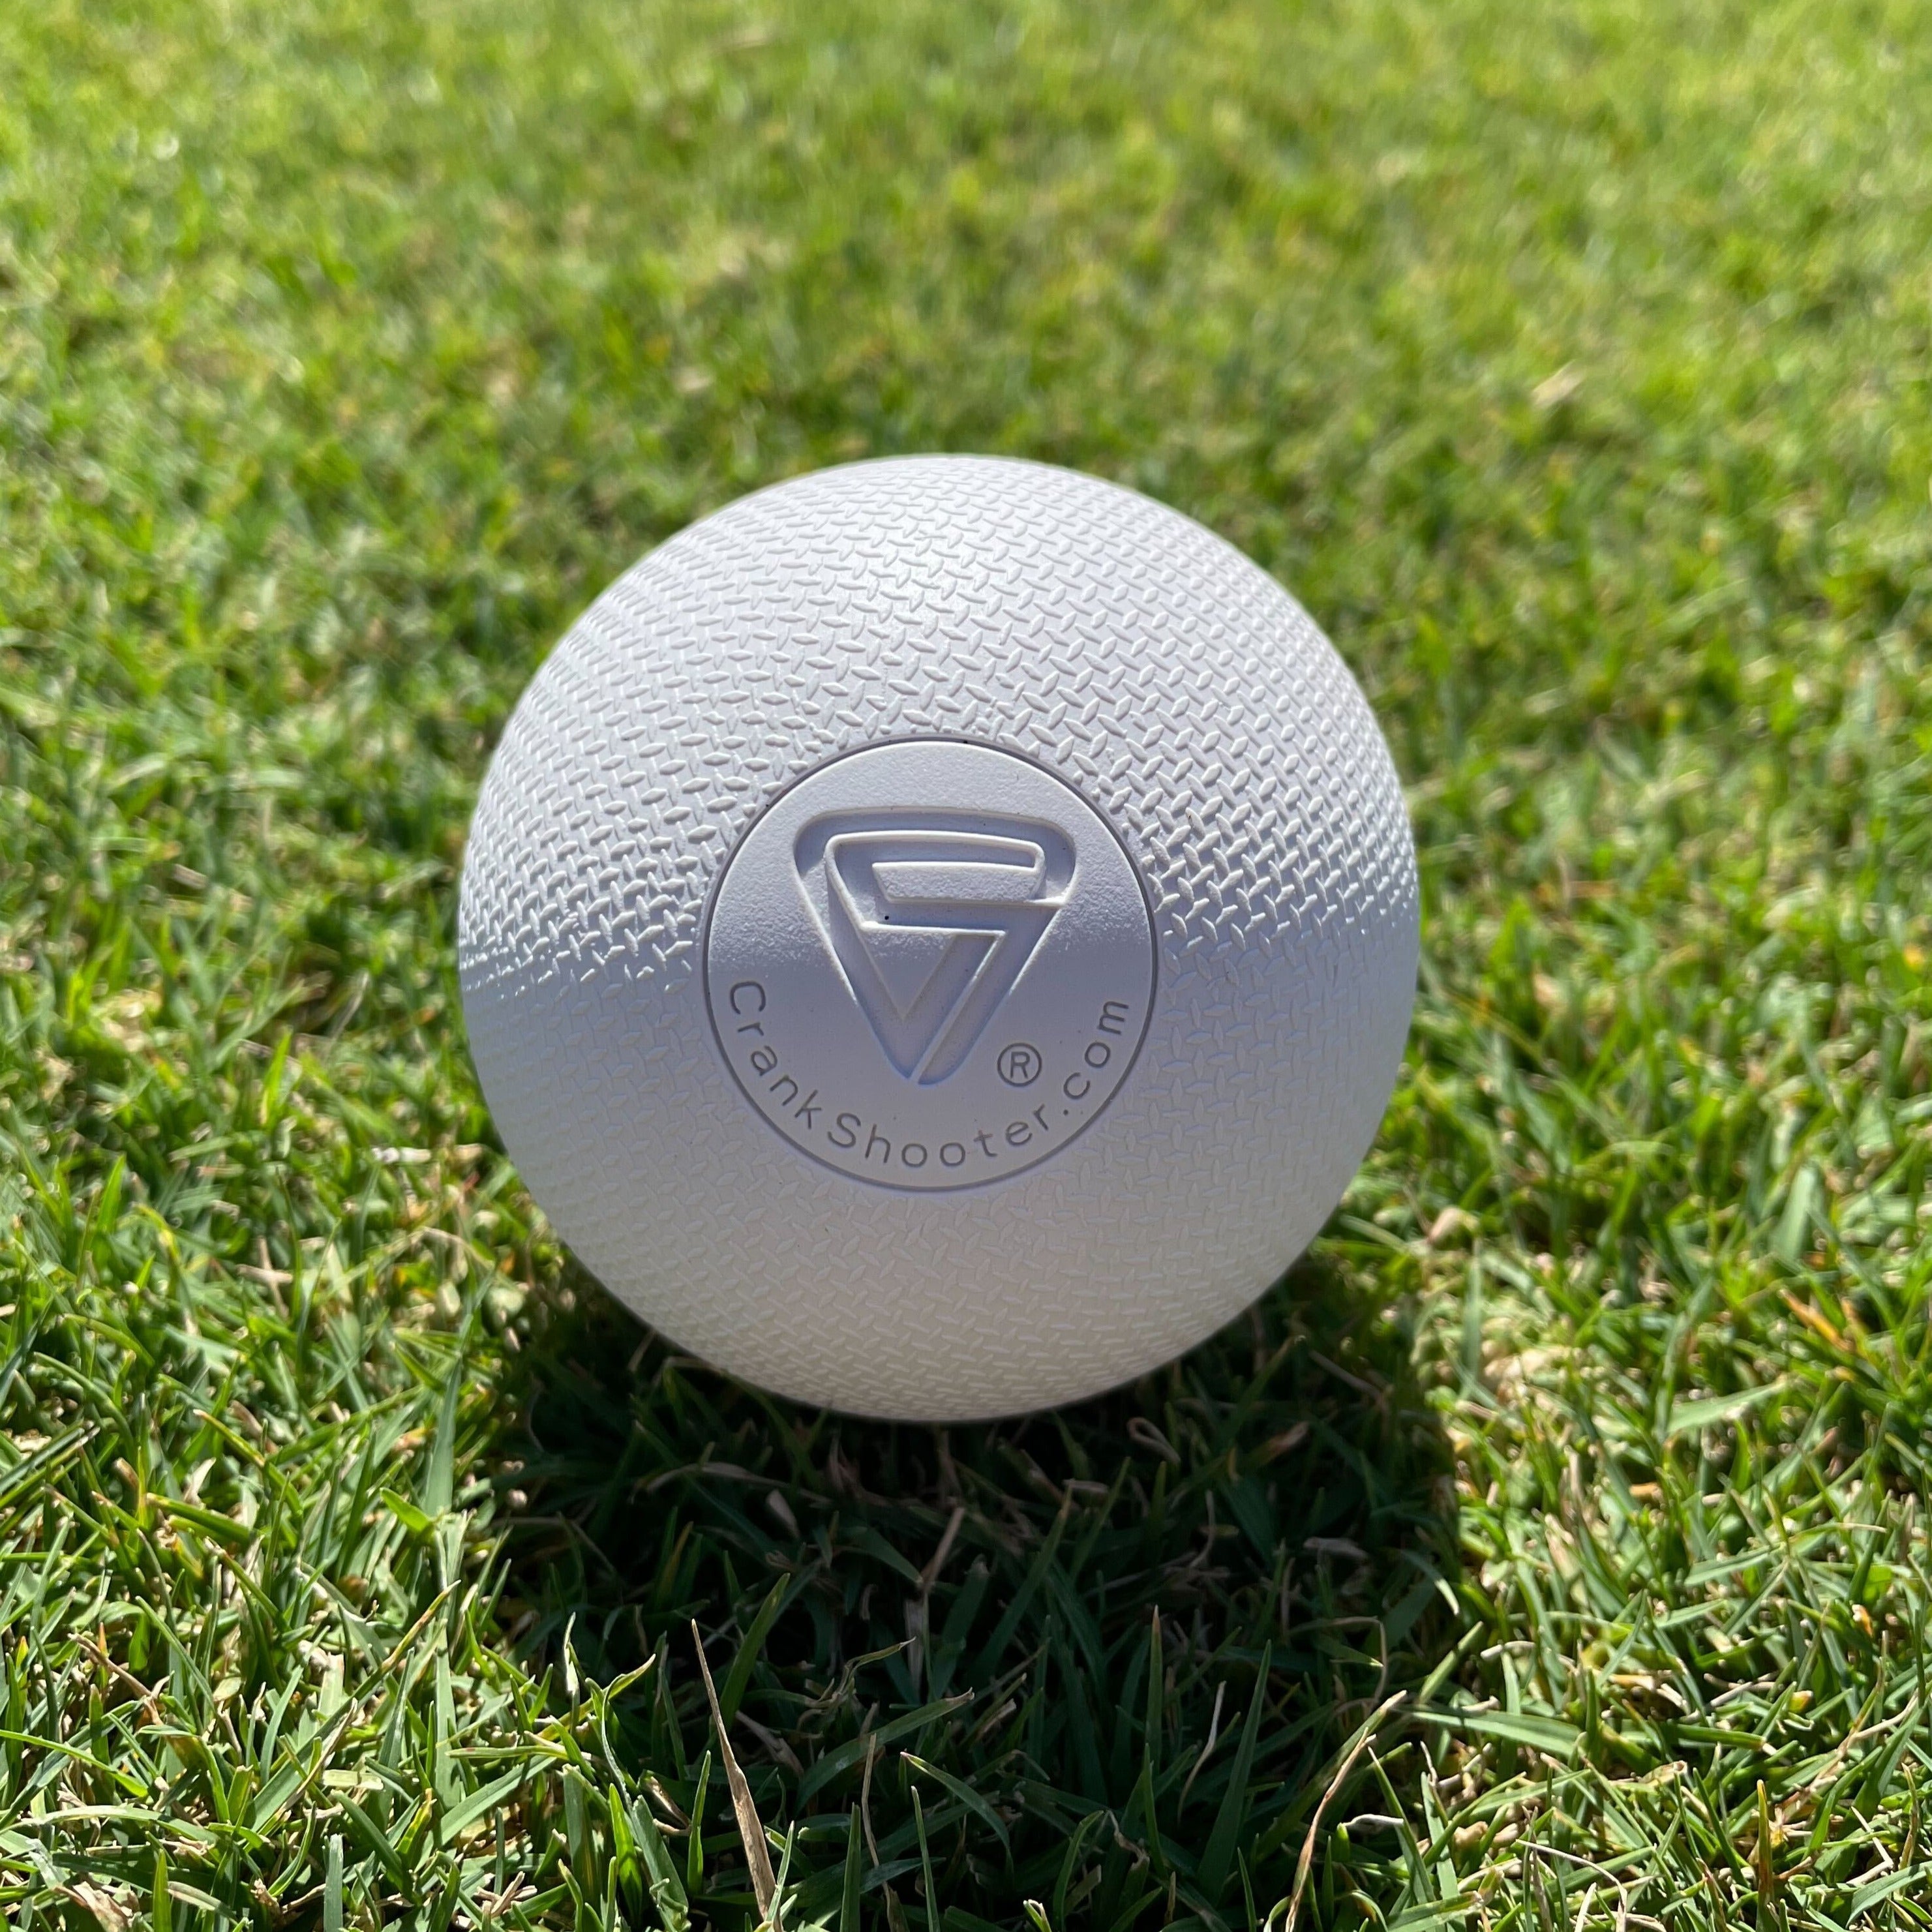 Crankshooter®TX1 TEXTURED and Fully Certified Lacrosse Balls